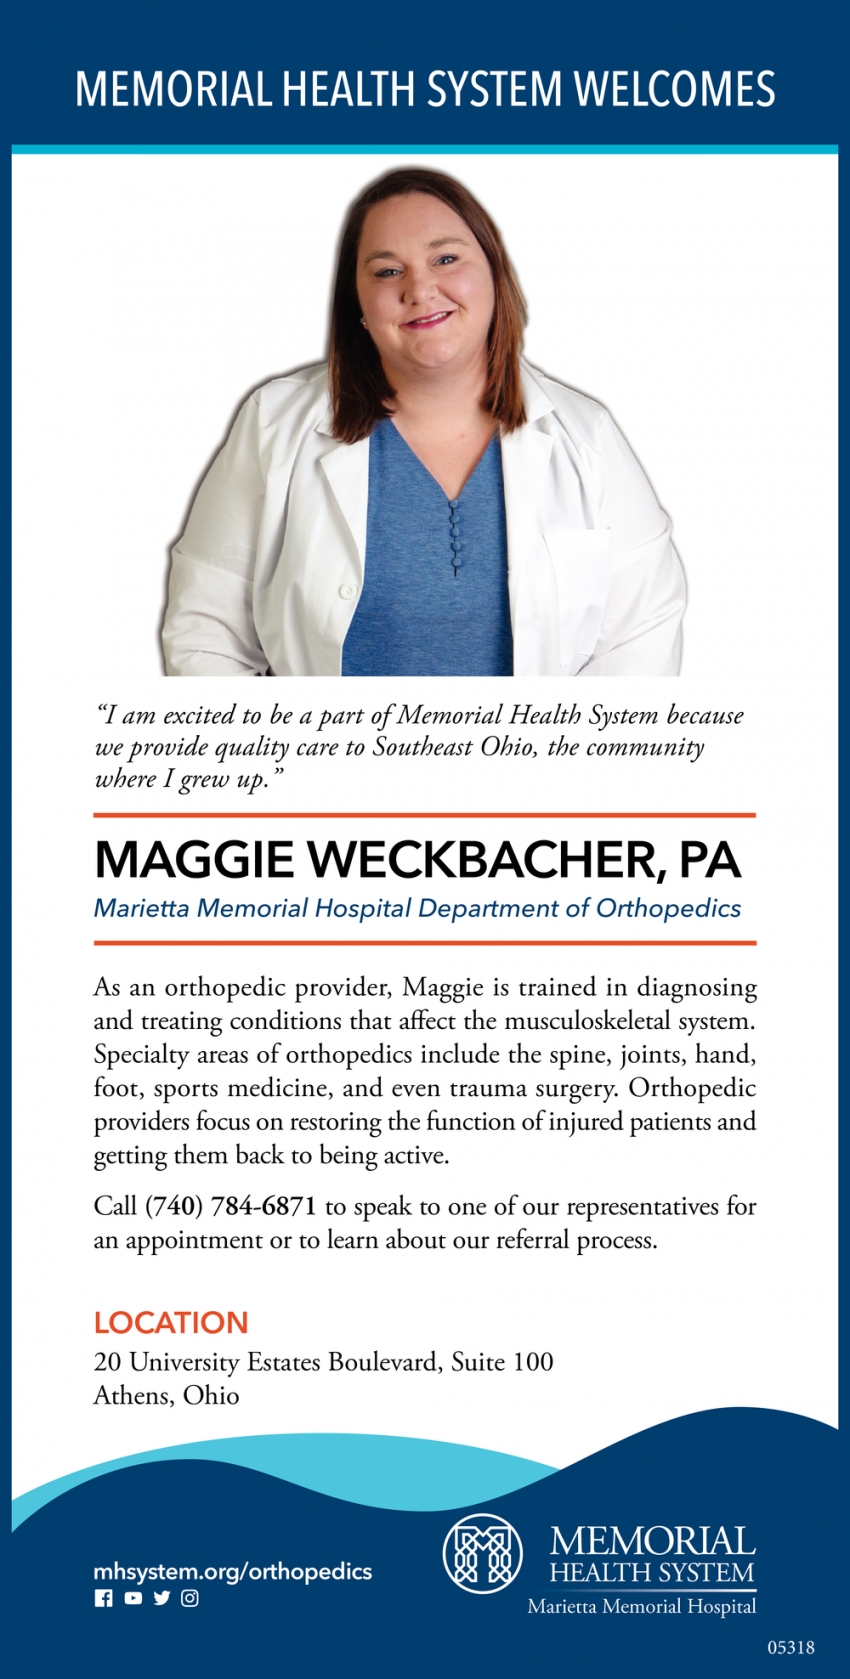 Memorial Health System Welcomes Maggie Weckbacher, PA